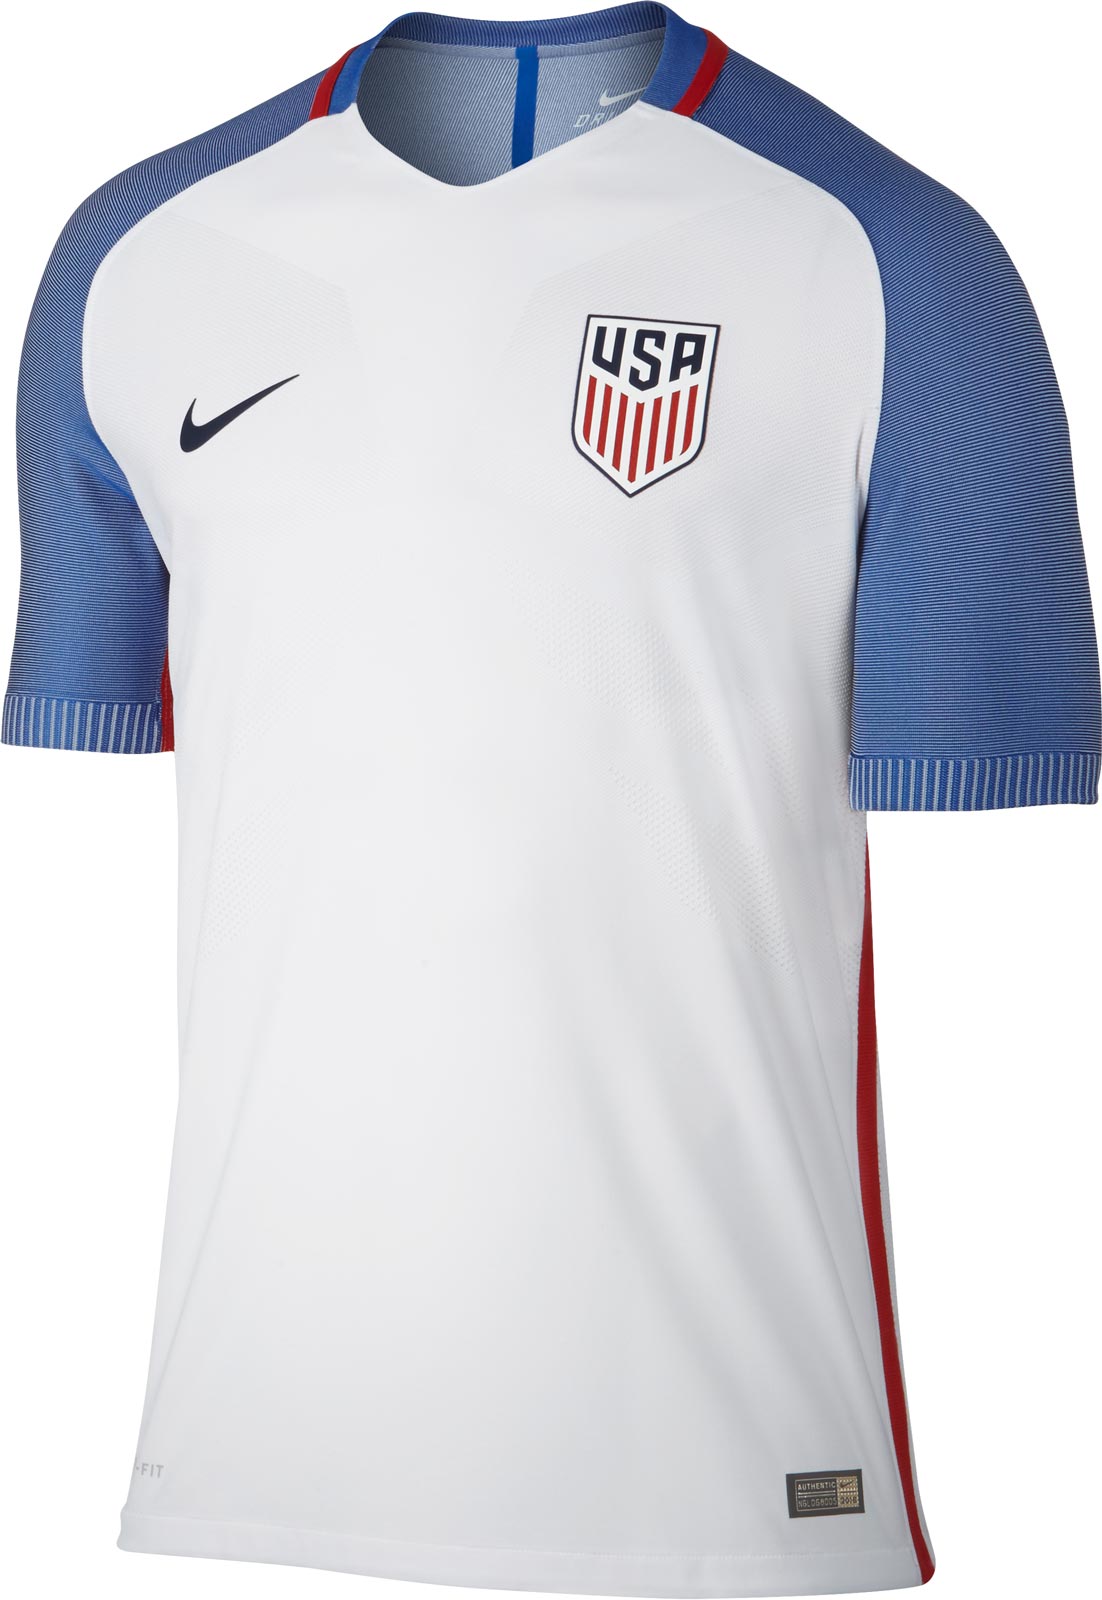 revealed-usa-2016-kit-could-have-looked-quite-differently-3.jpg